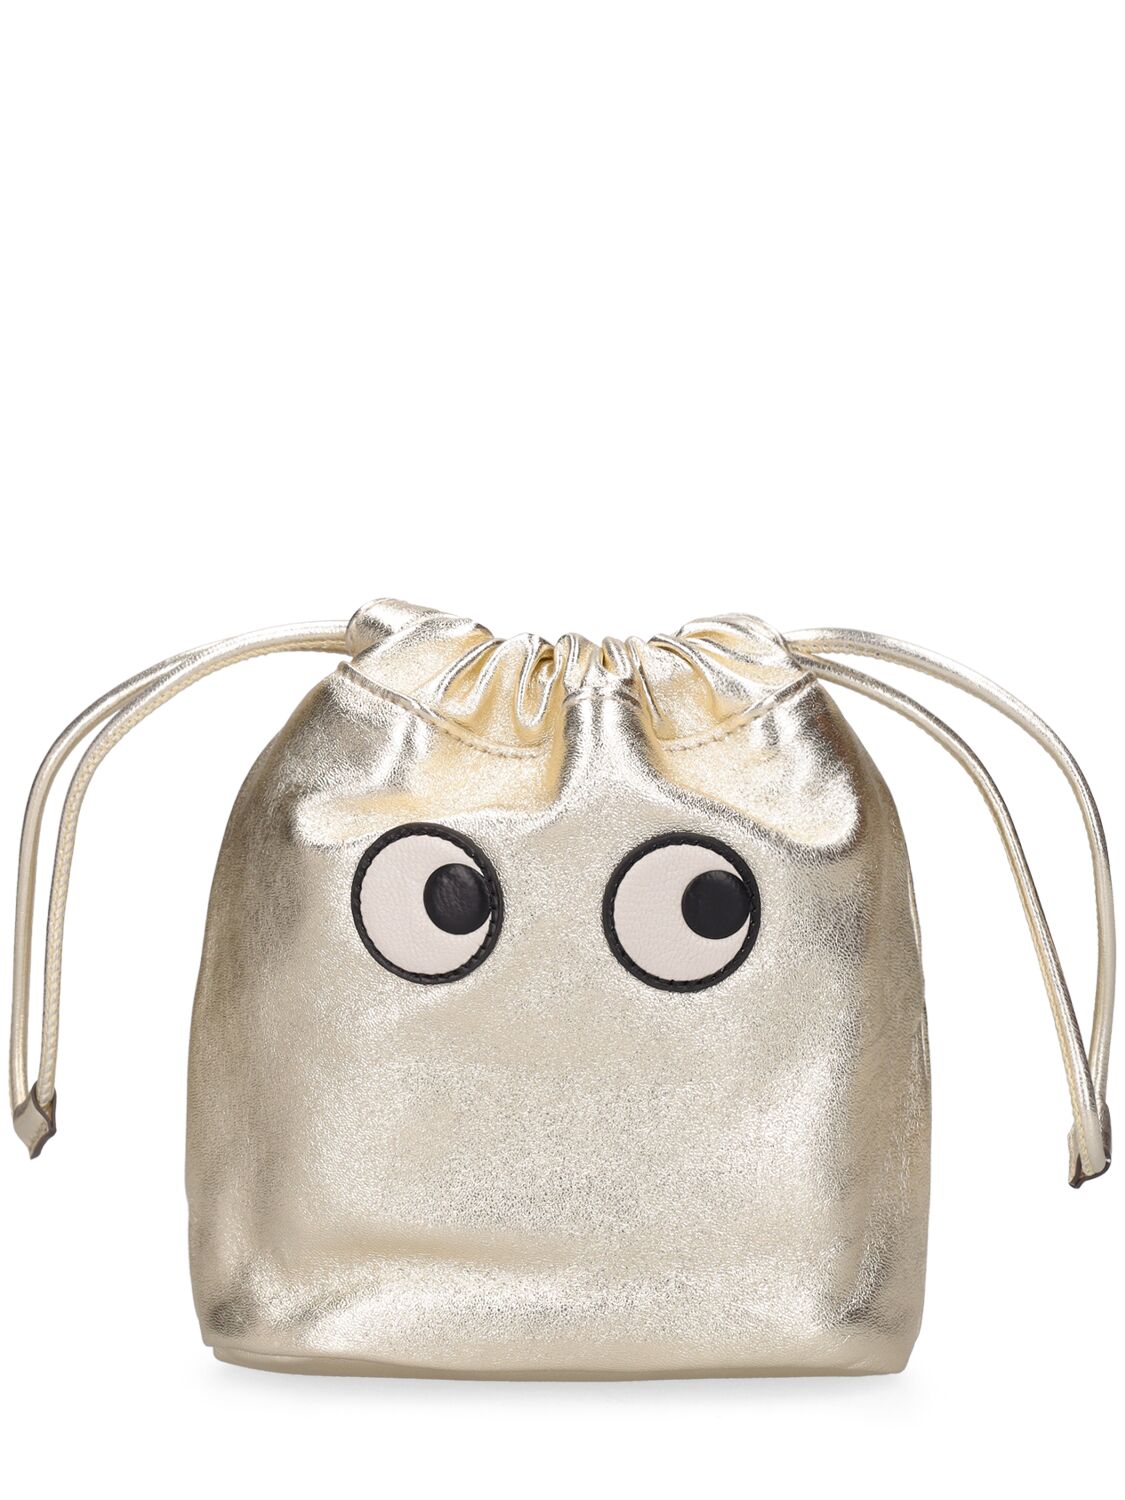 Image of Drawstring Eyes Metallic Leather Pouch